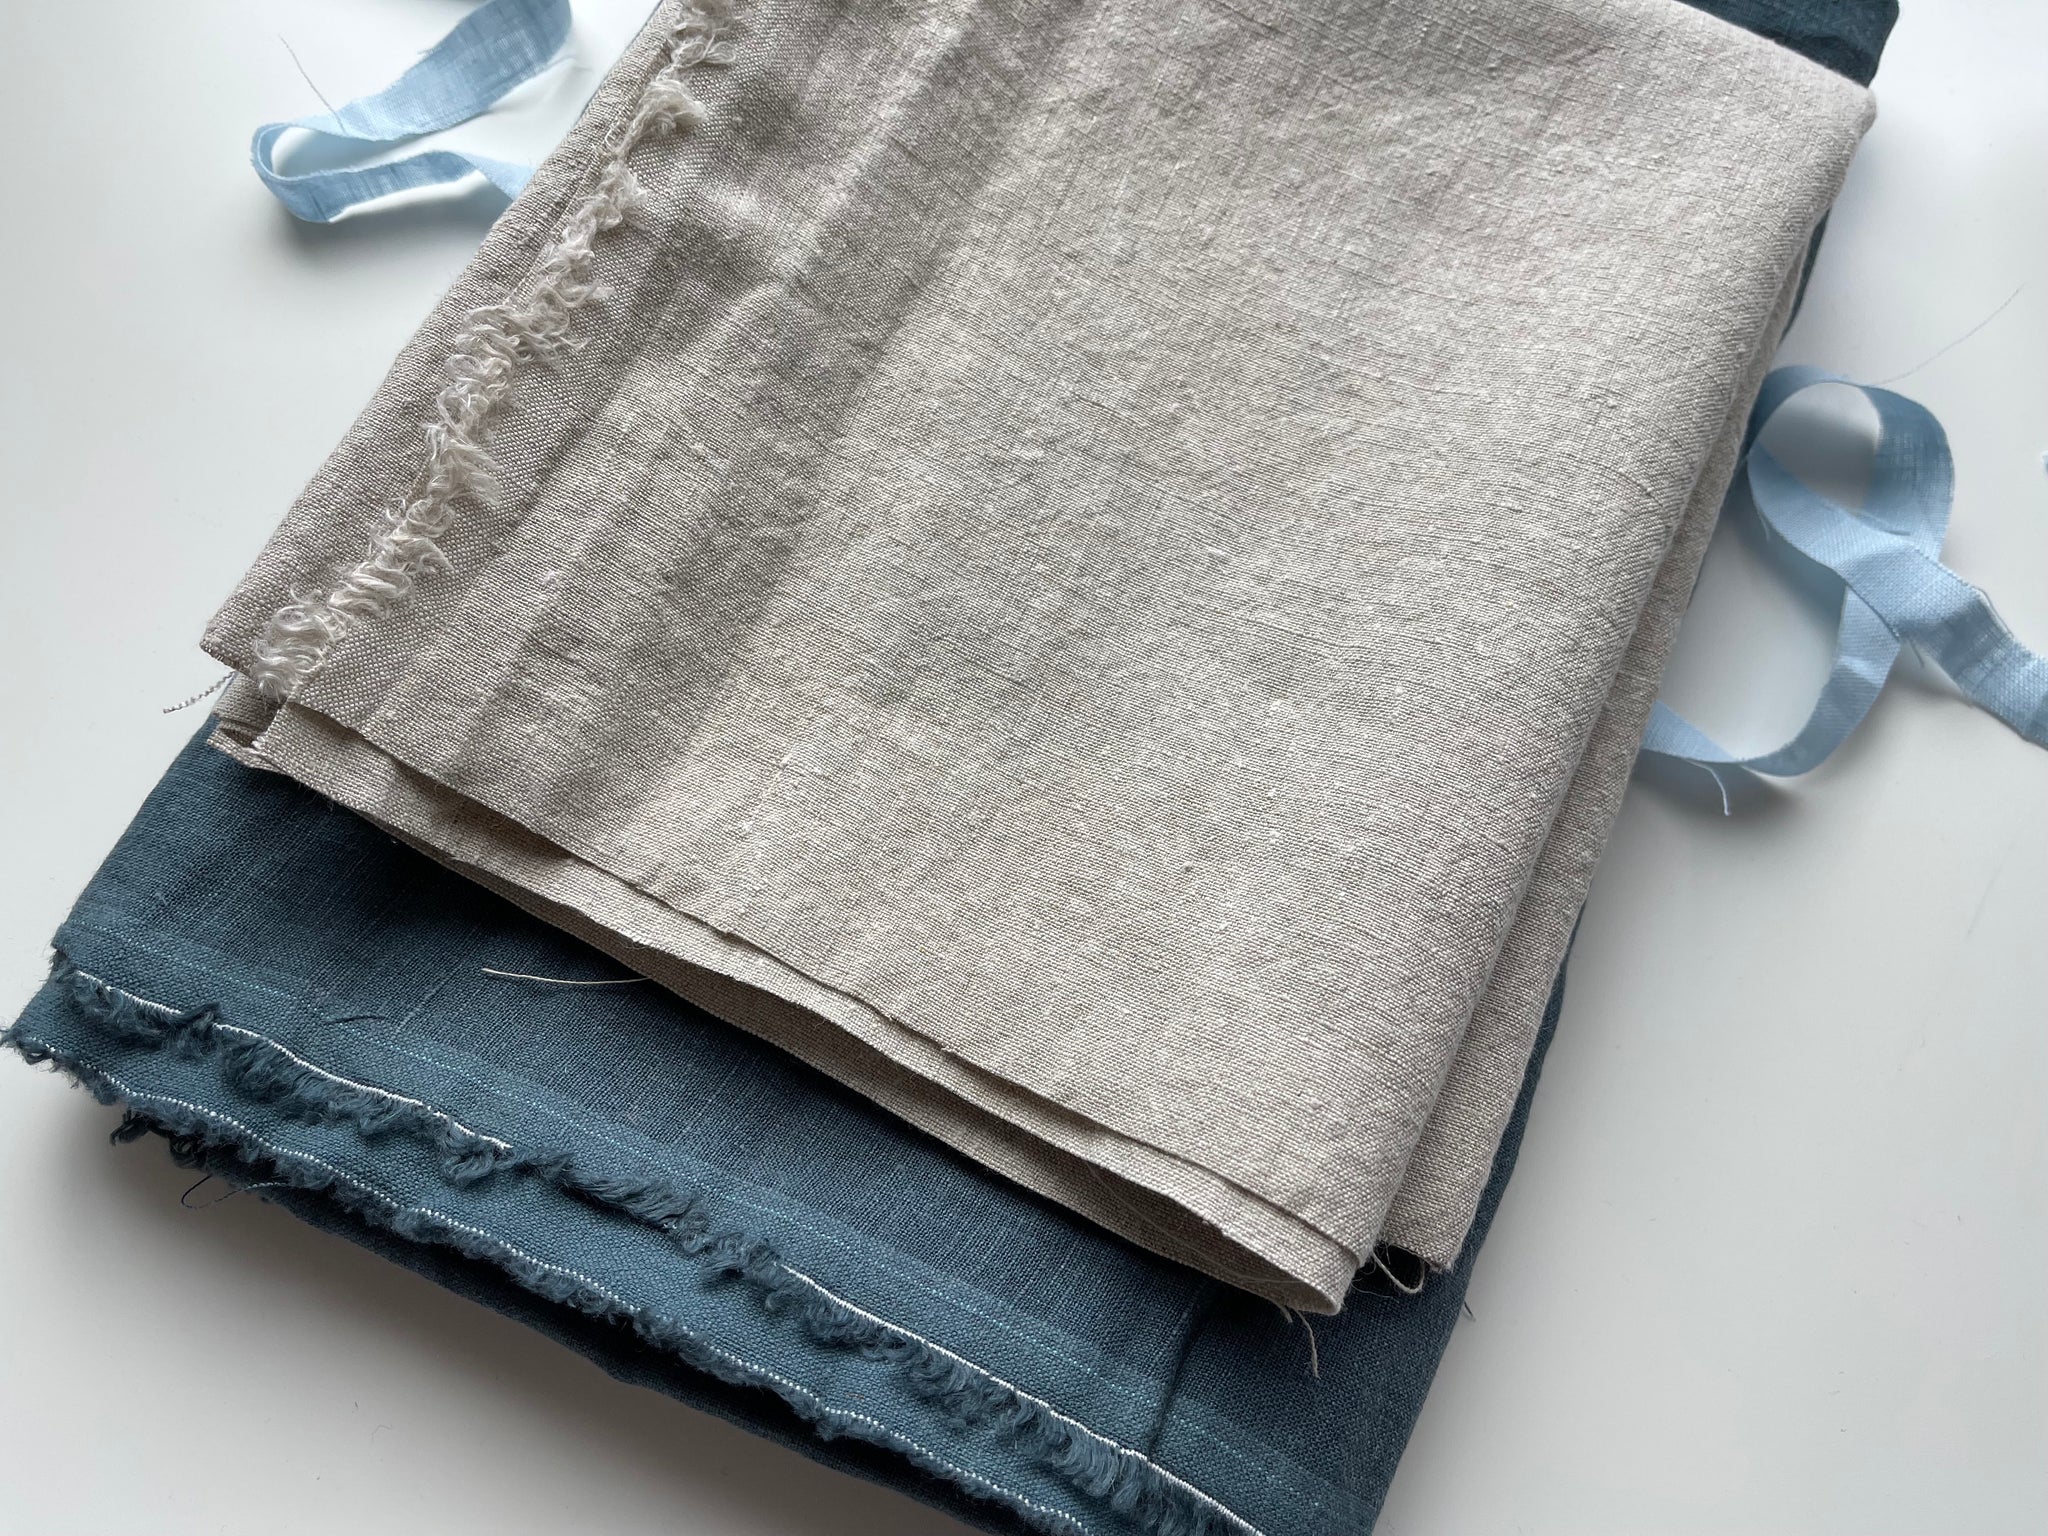 Linen Fabric Remnants - Sea Blue and Natural Stone Washed